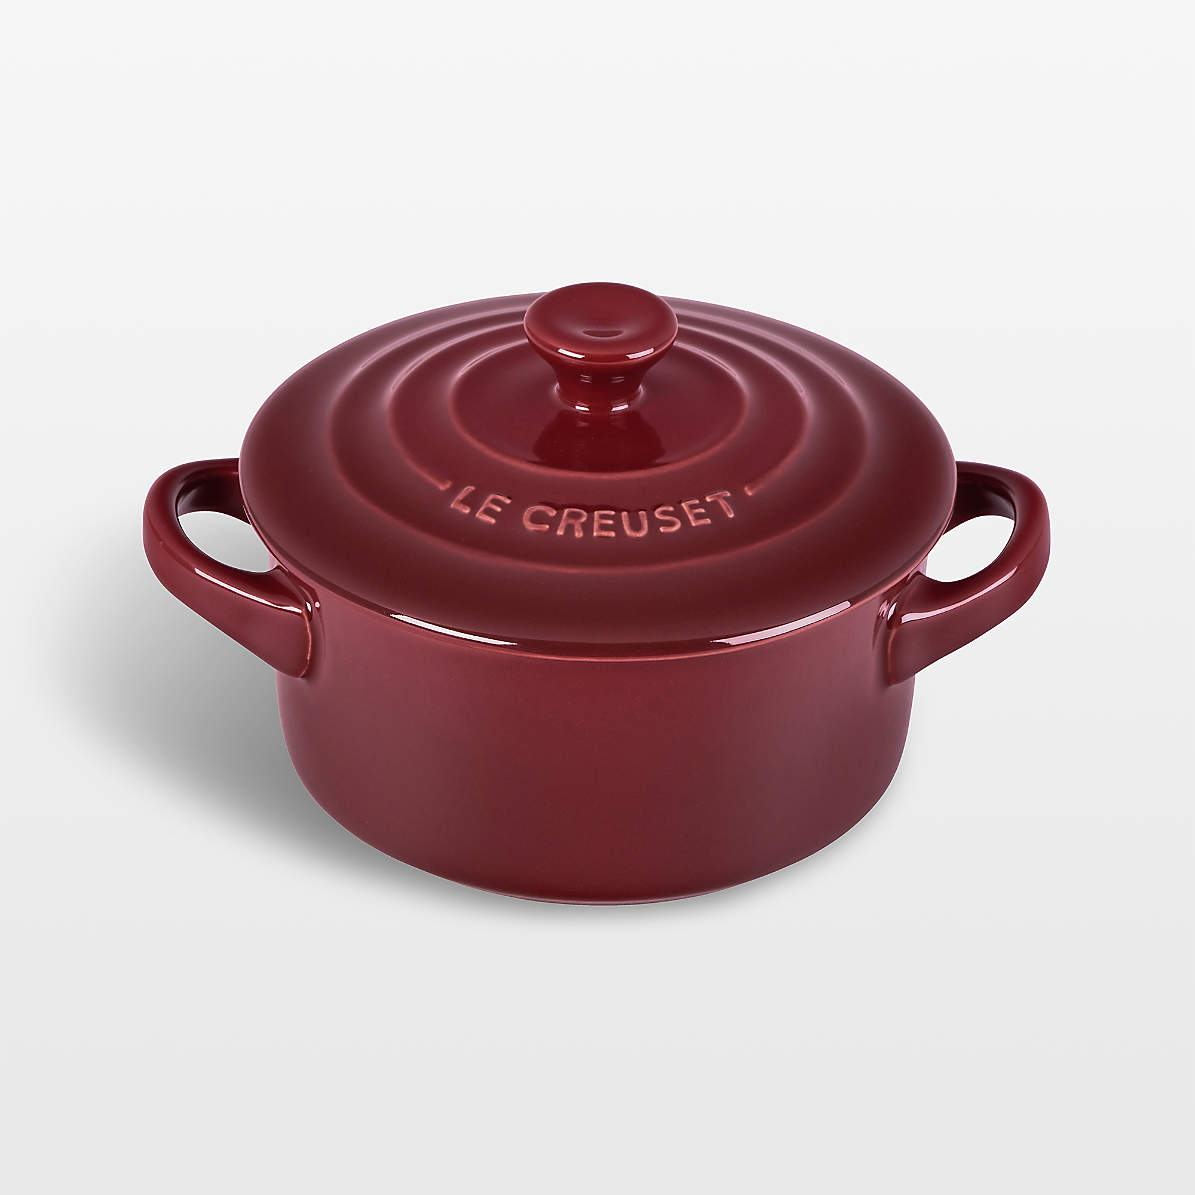 Round Mini Casserole Dish - Red, Cast Iron - Enameled, Stainless Steel Knob  - 8 oz, 5 1/4 x 4 x 3 - 1 count box